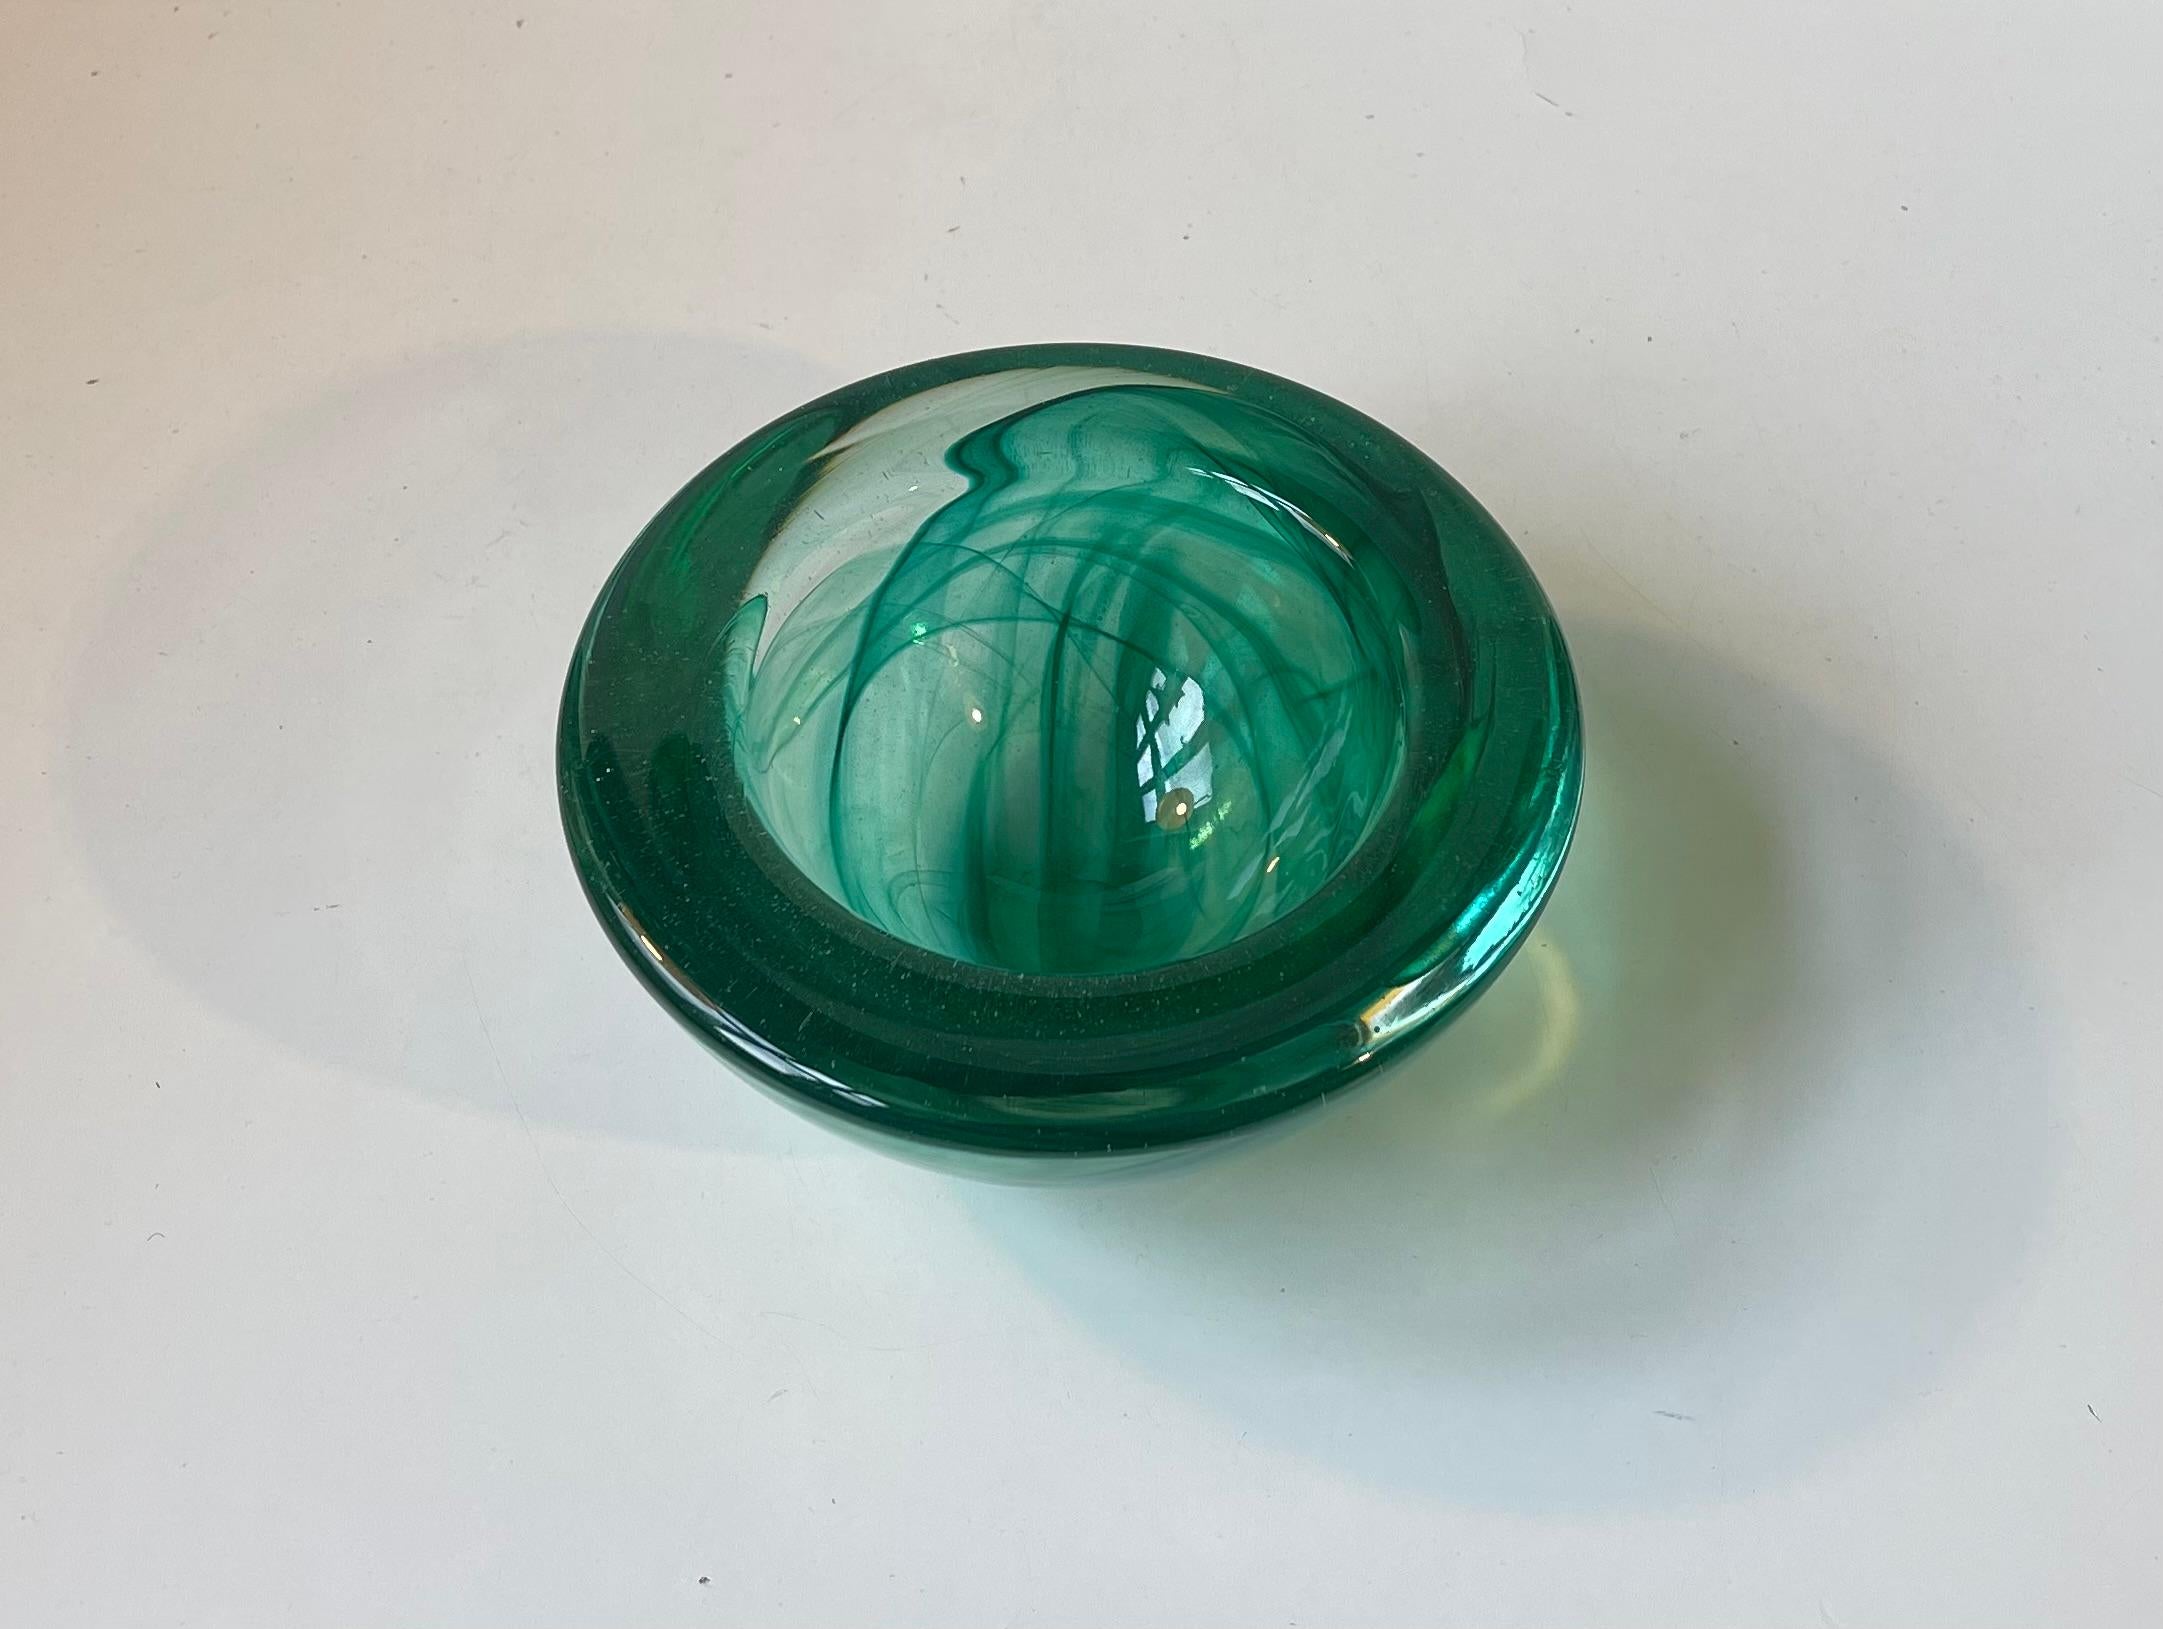 Thick and heavy conical art glass bowl from Kosta Boda in Sweden. It was designed by Anna Ehrner in the mid 1980s. The bowl is called Atoll and it features swirl-work to the inside of the bowl. Original sticker from Kosta Boda still present to the